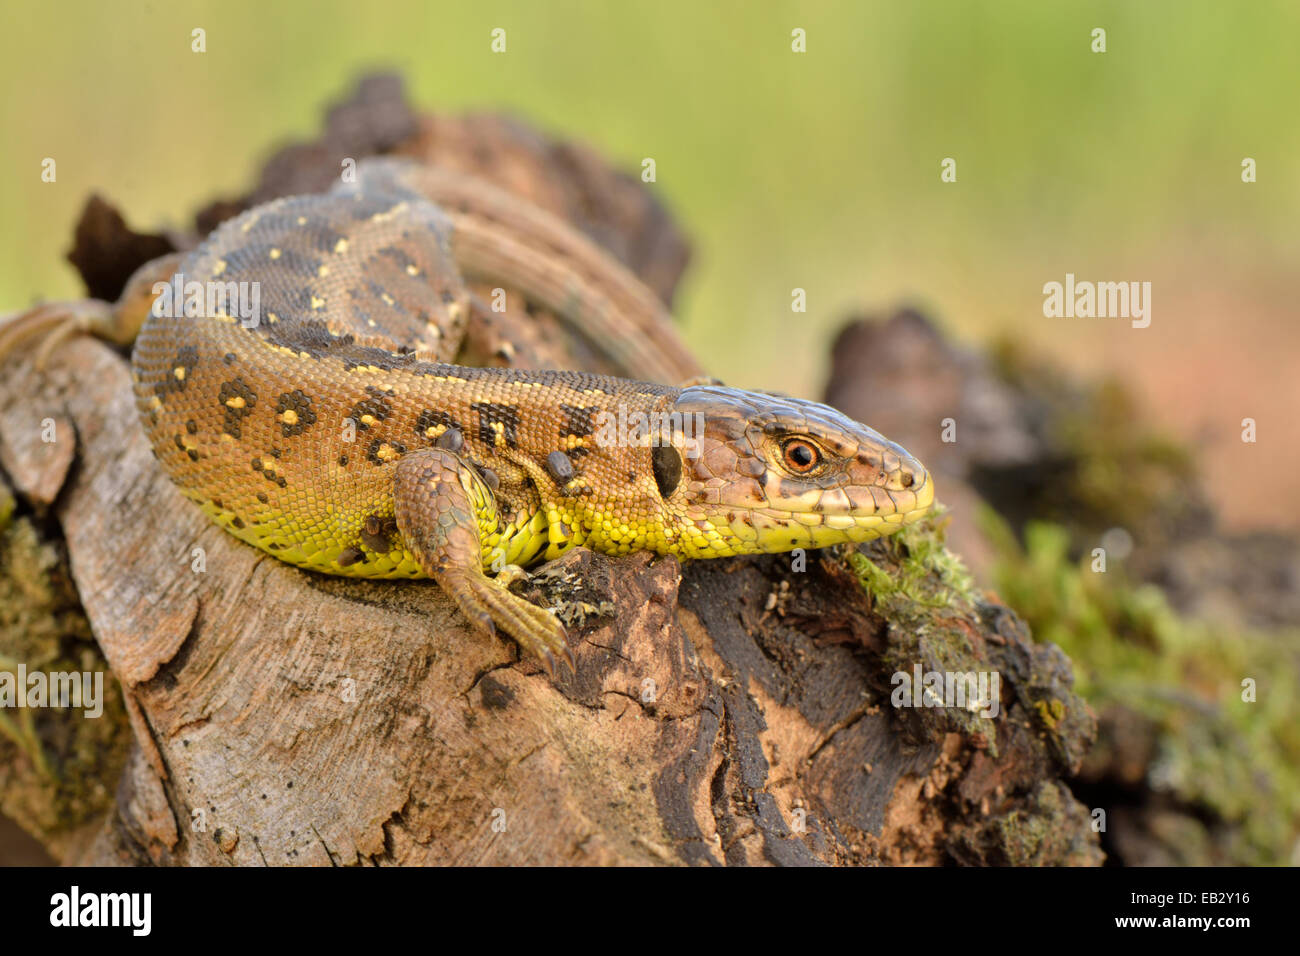 Sand Lizard (Lacerta agilis), female, basking in the sun, just before egg deposition, Dortmund, Ruhr district Stock Photo